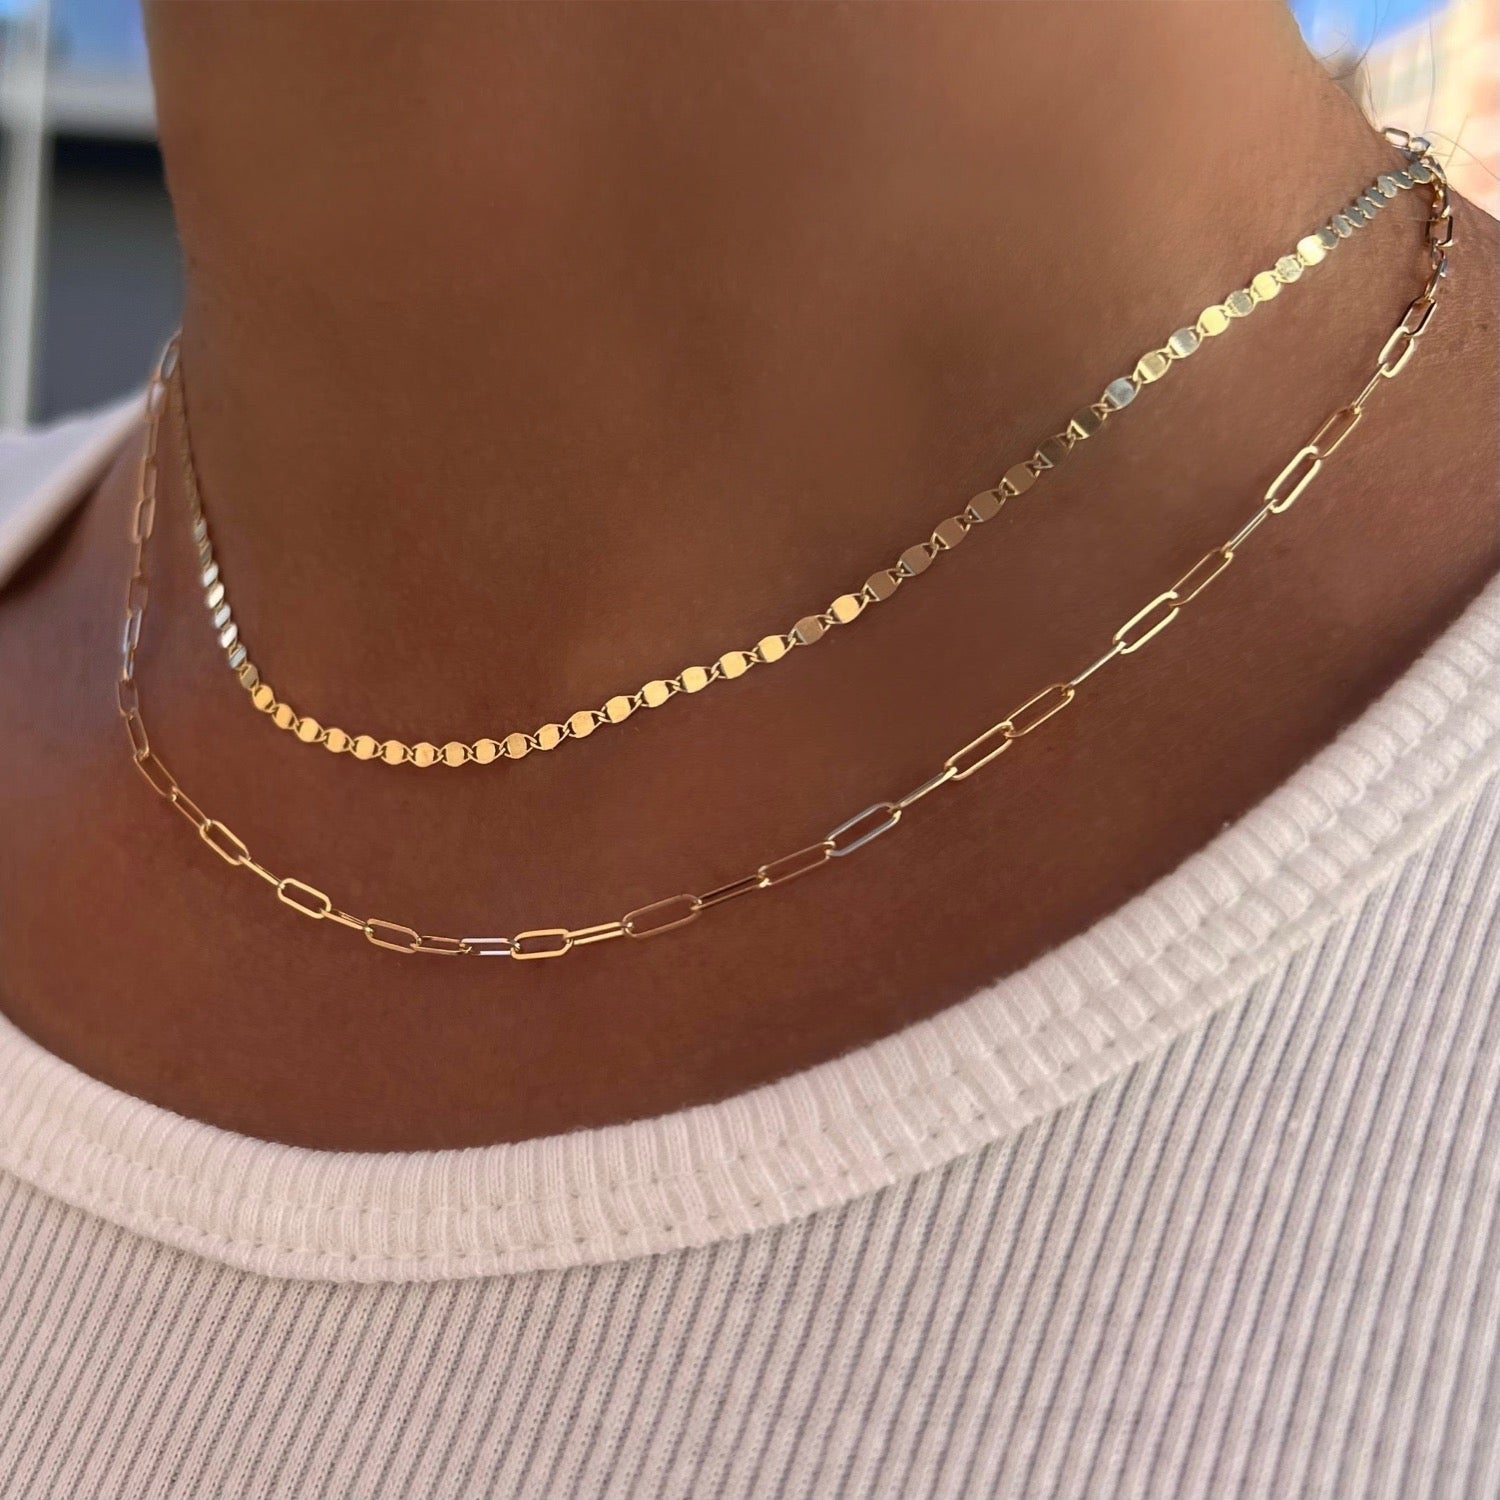 Mirror Chain Necklace 14K Yellow Gold / 26 Inches by Baby Gold - Shop Custom Gold Jewelry